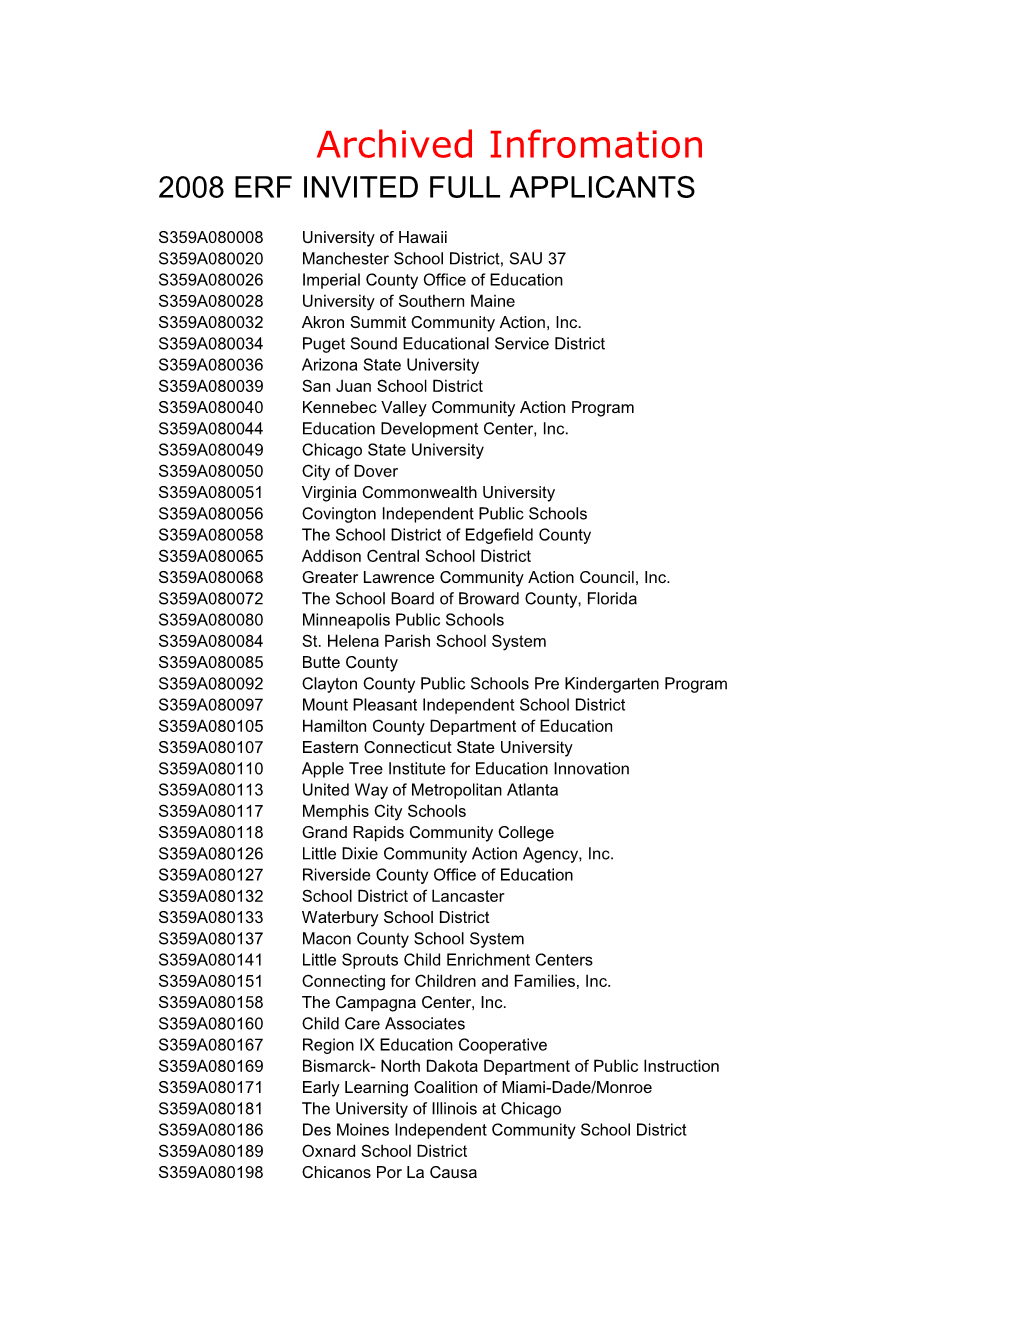 2008 Archived: Early Reading First Invited Full Applicants (MS WORD)